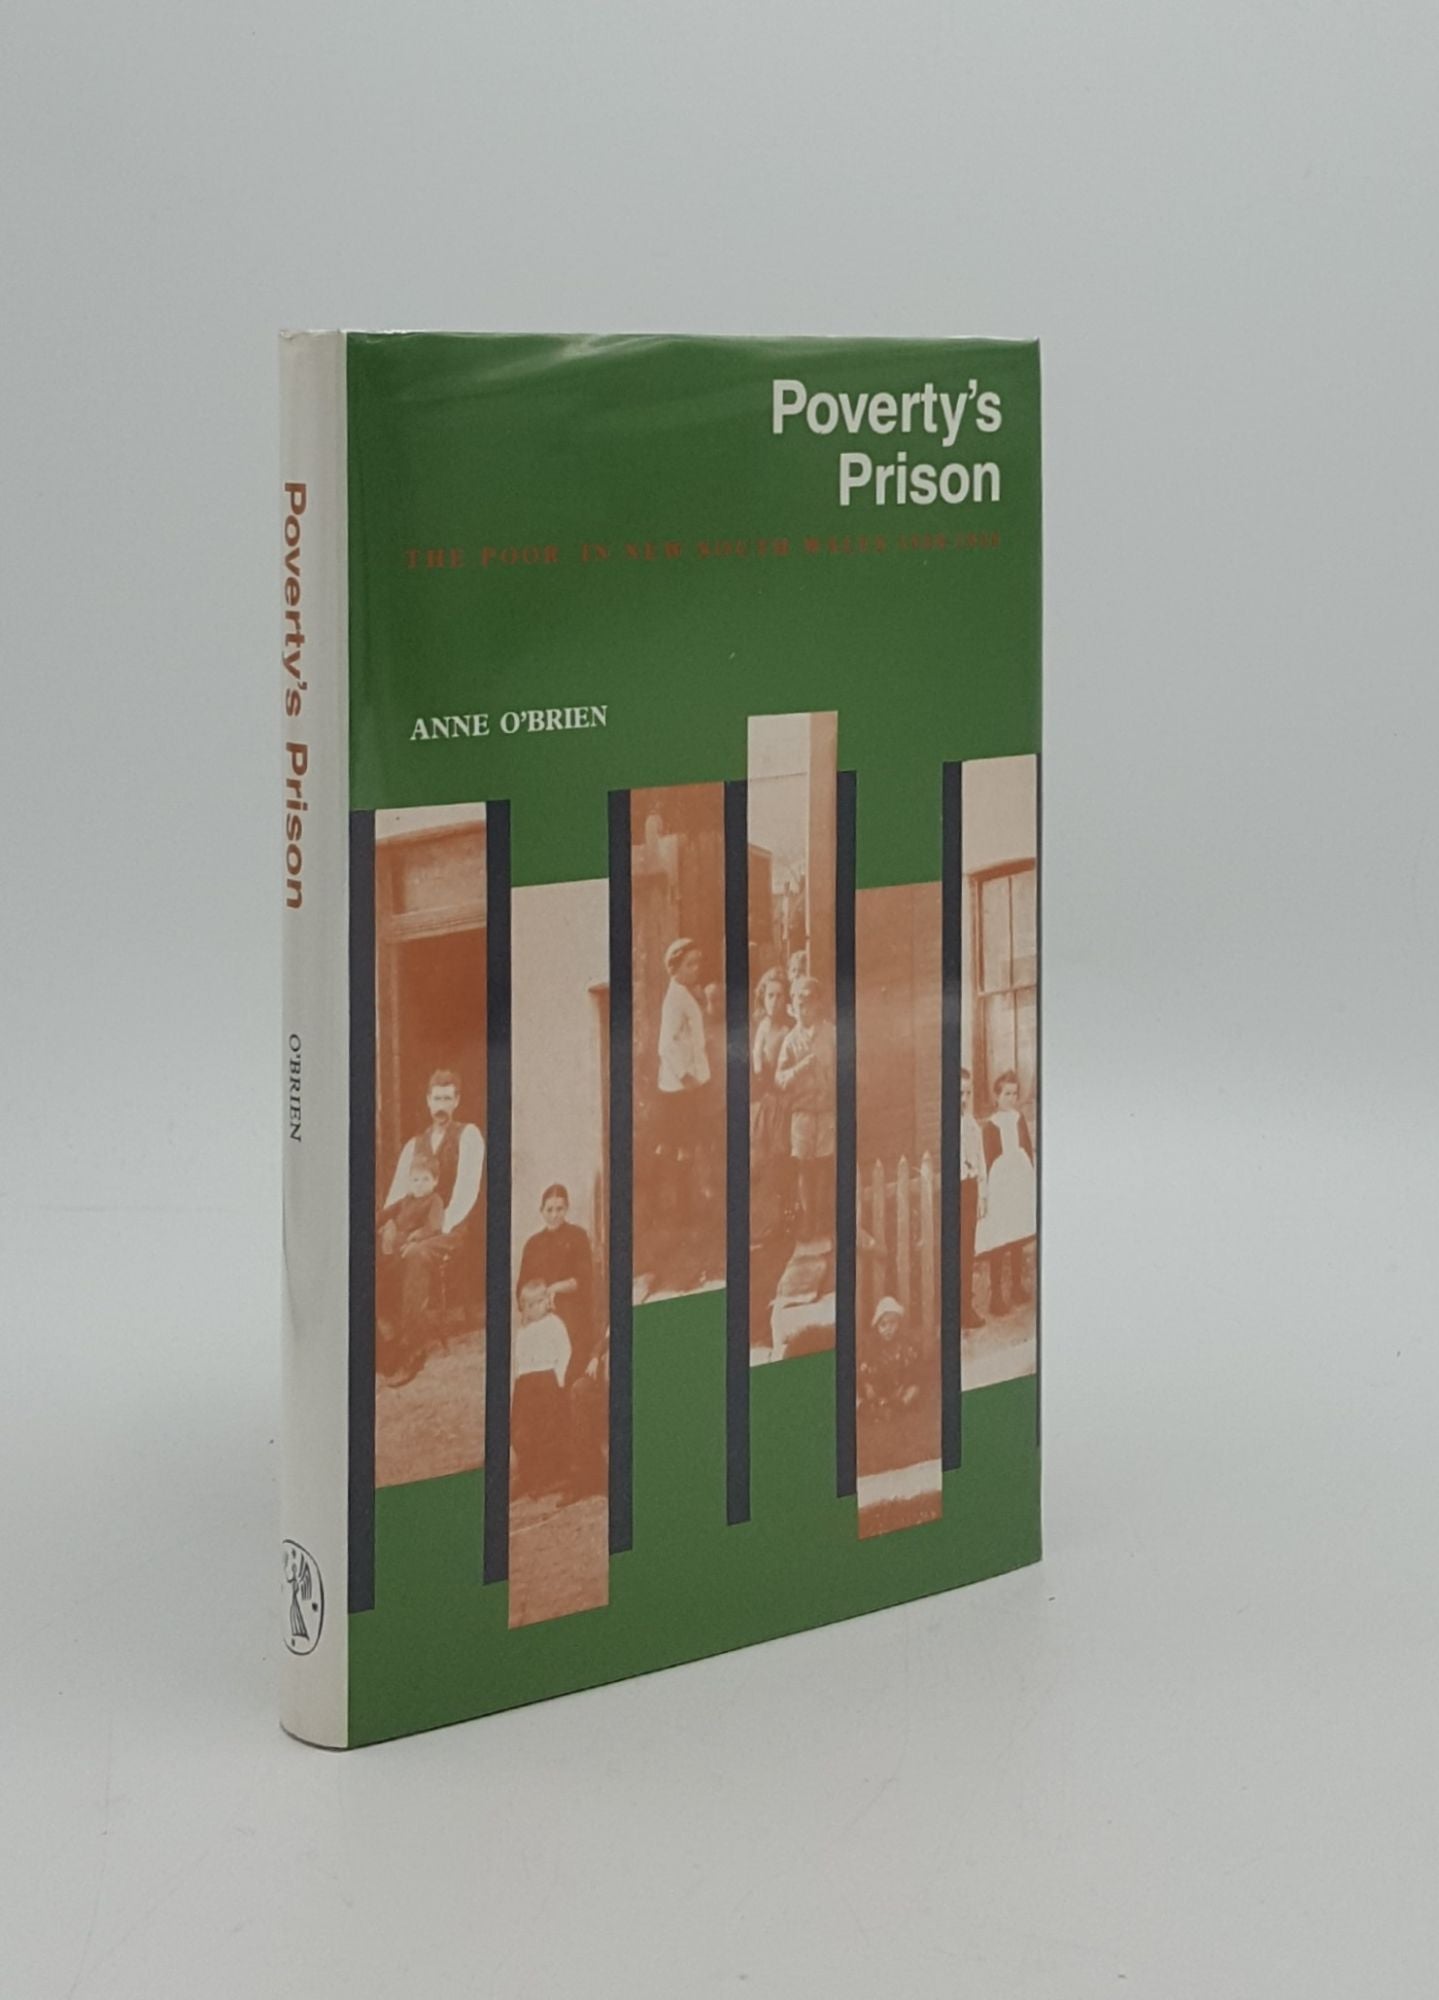 O'BRIEN Anne - Poverty's Prison the Poor in New South Wales 1880-1918